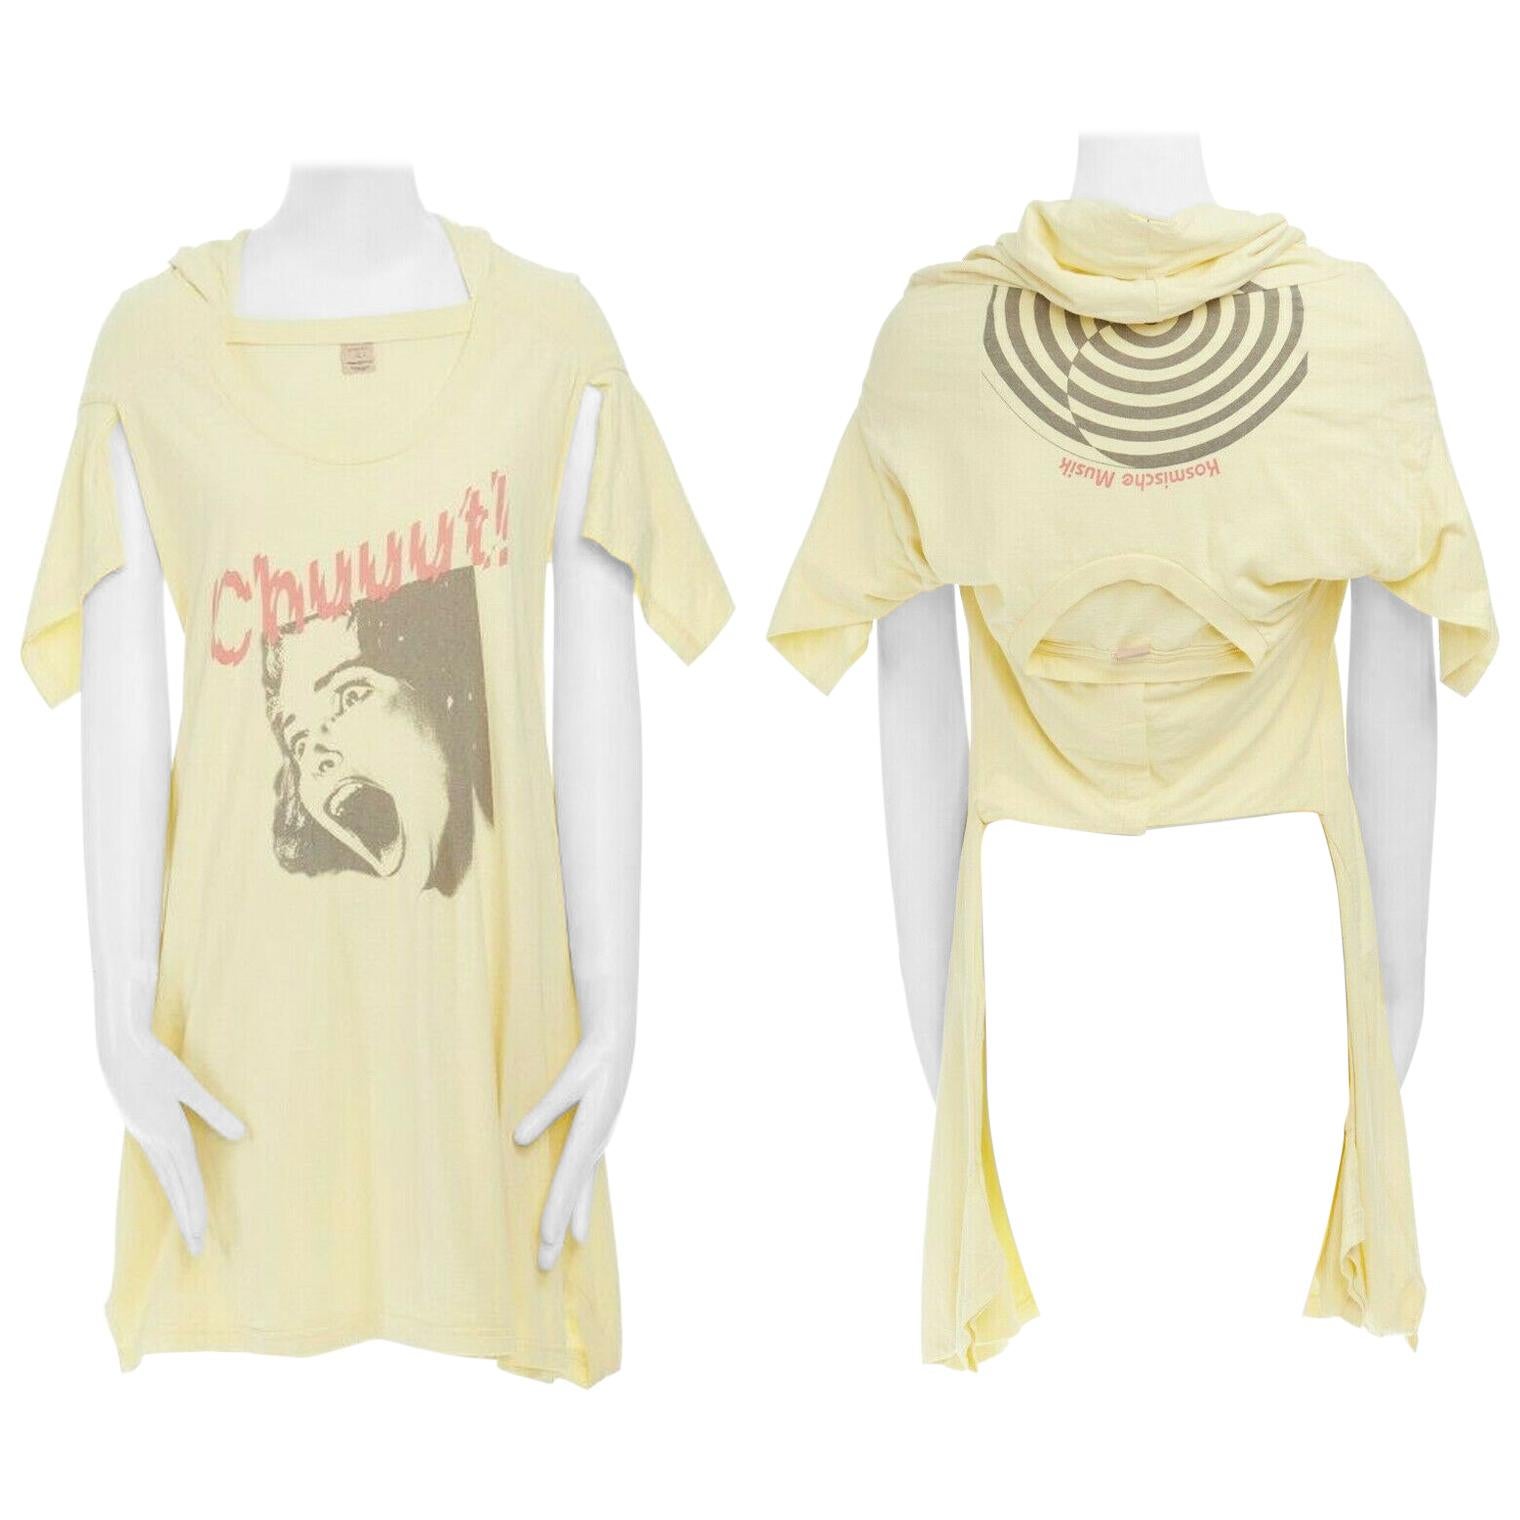 new UNDERCOVER Chuut! print yellow cotton deconstructed  t-shirt tunic top JP2 M